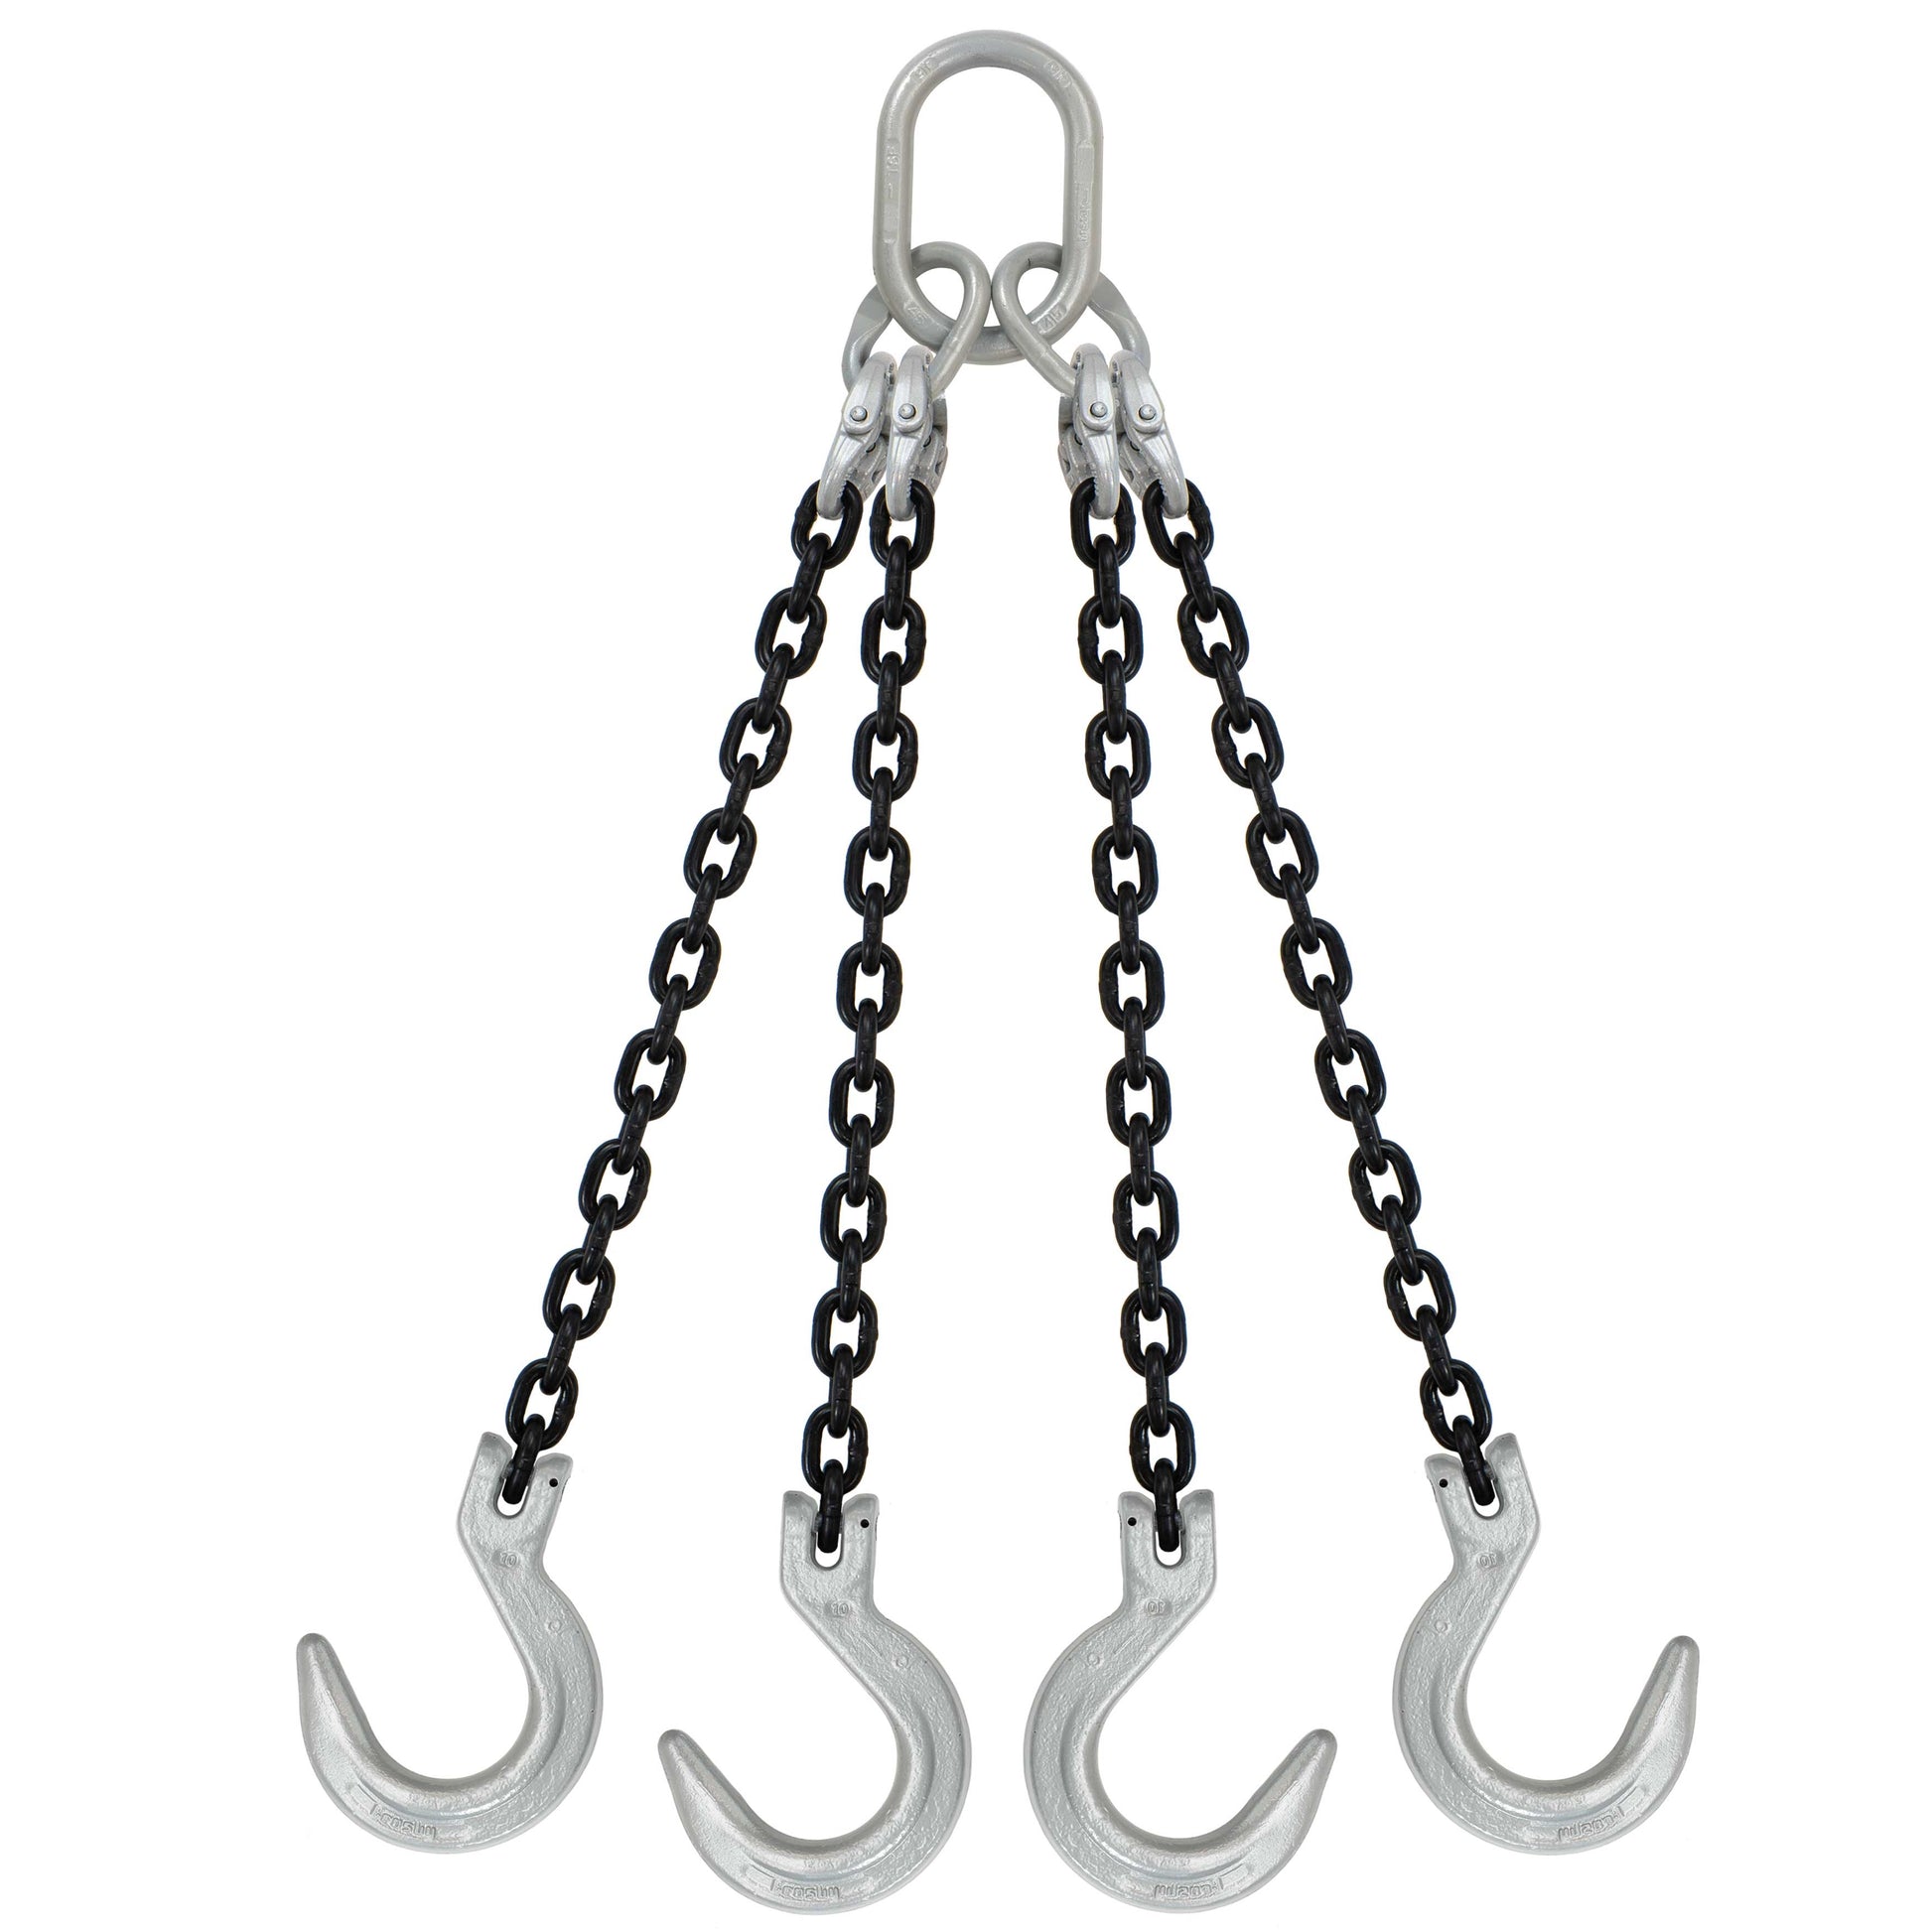 12 inch x 20 foot Domestic 4 Leg Chain Sling w Crosby Foundry Hooks Grade 100 image 1 of 2